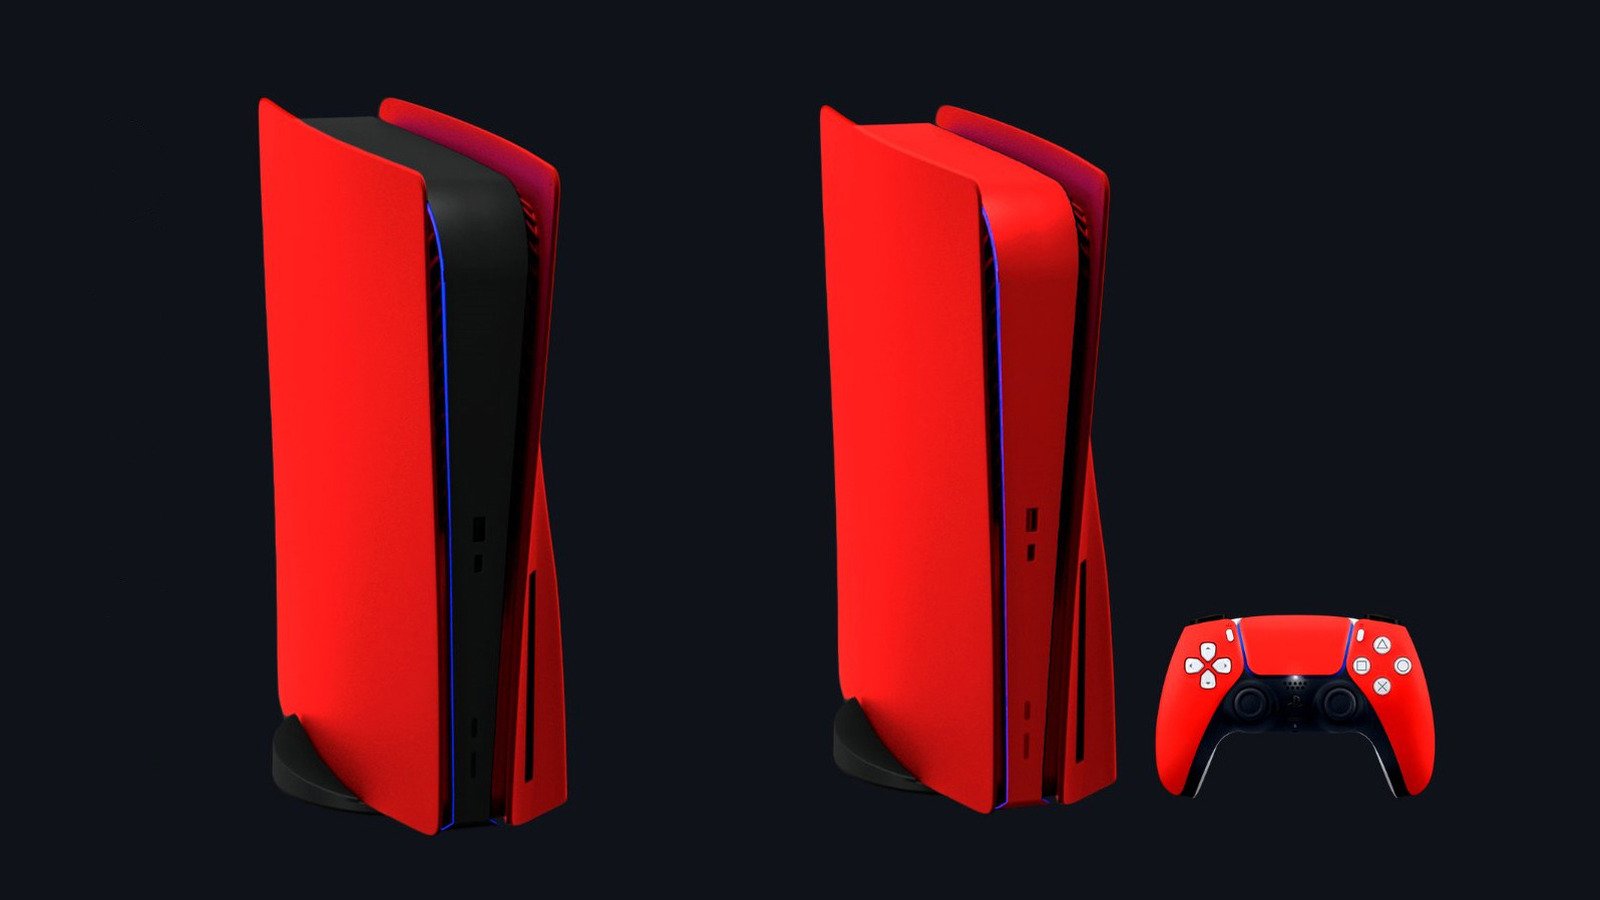 PS5 Has Even More Colors To Choose From - SVG